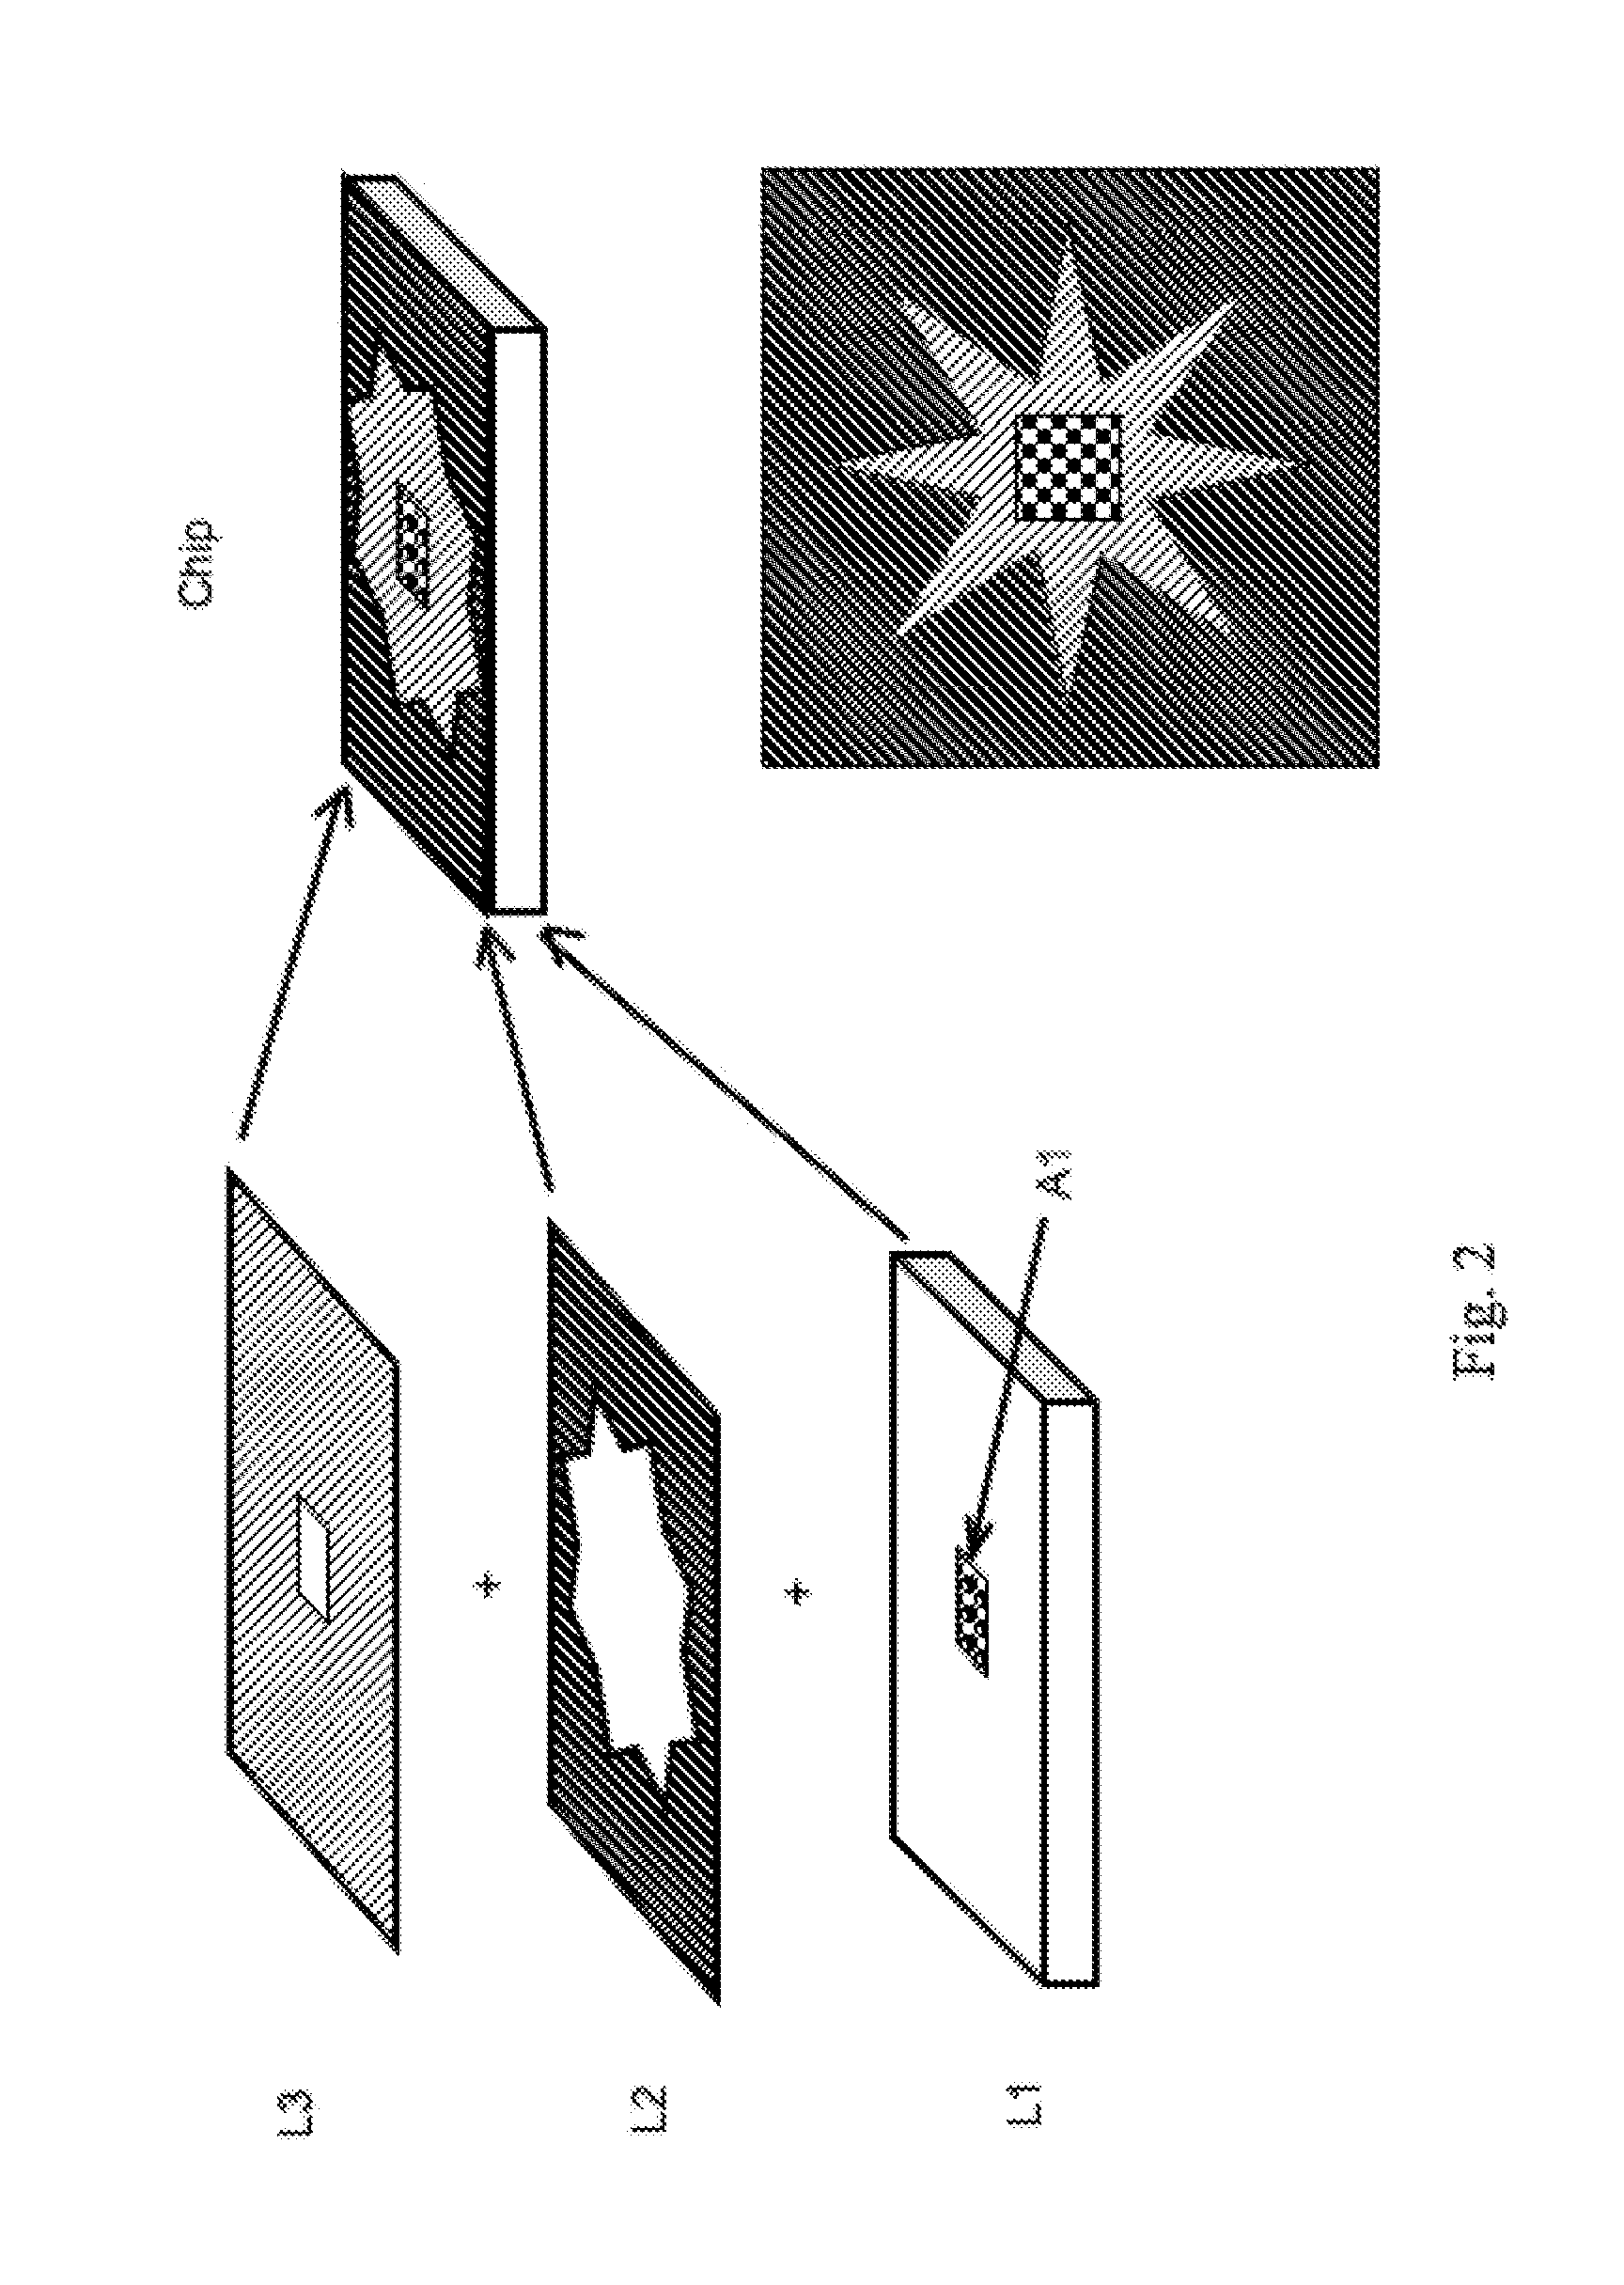 Quality control method for making a biochip displaying an encoded bead array